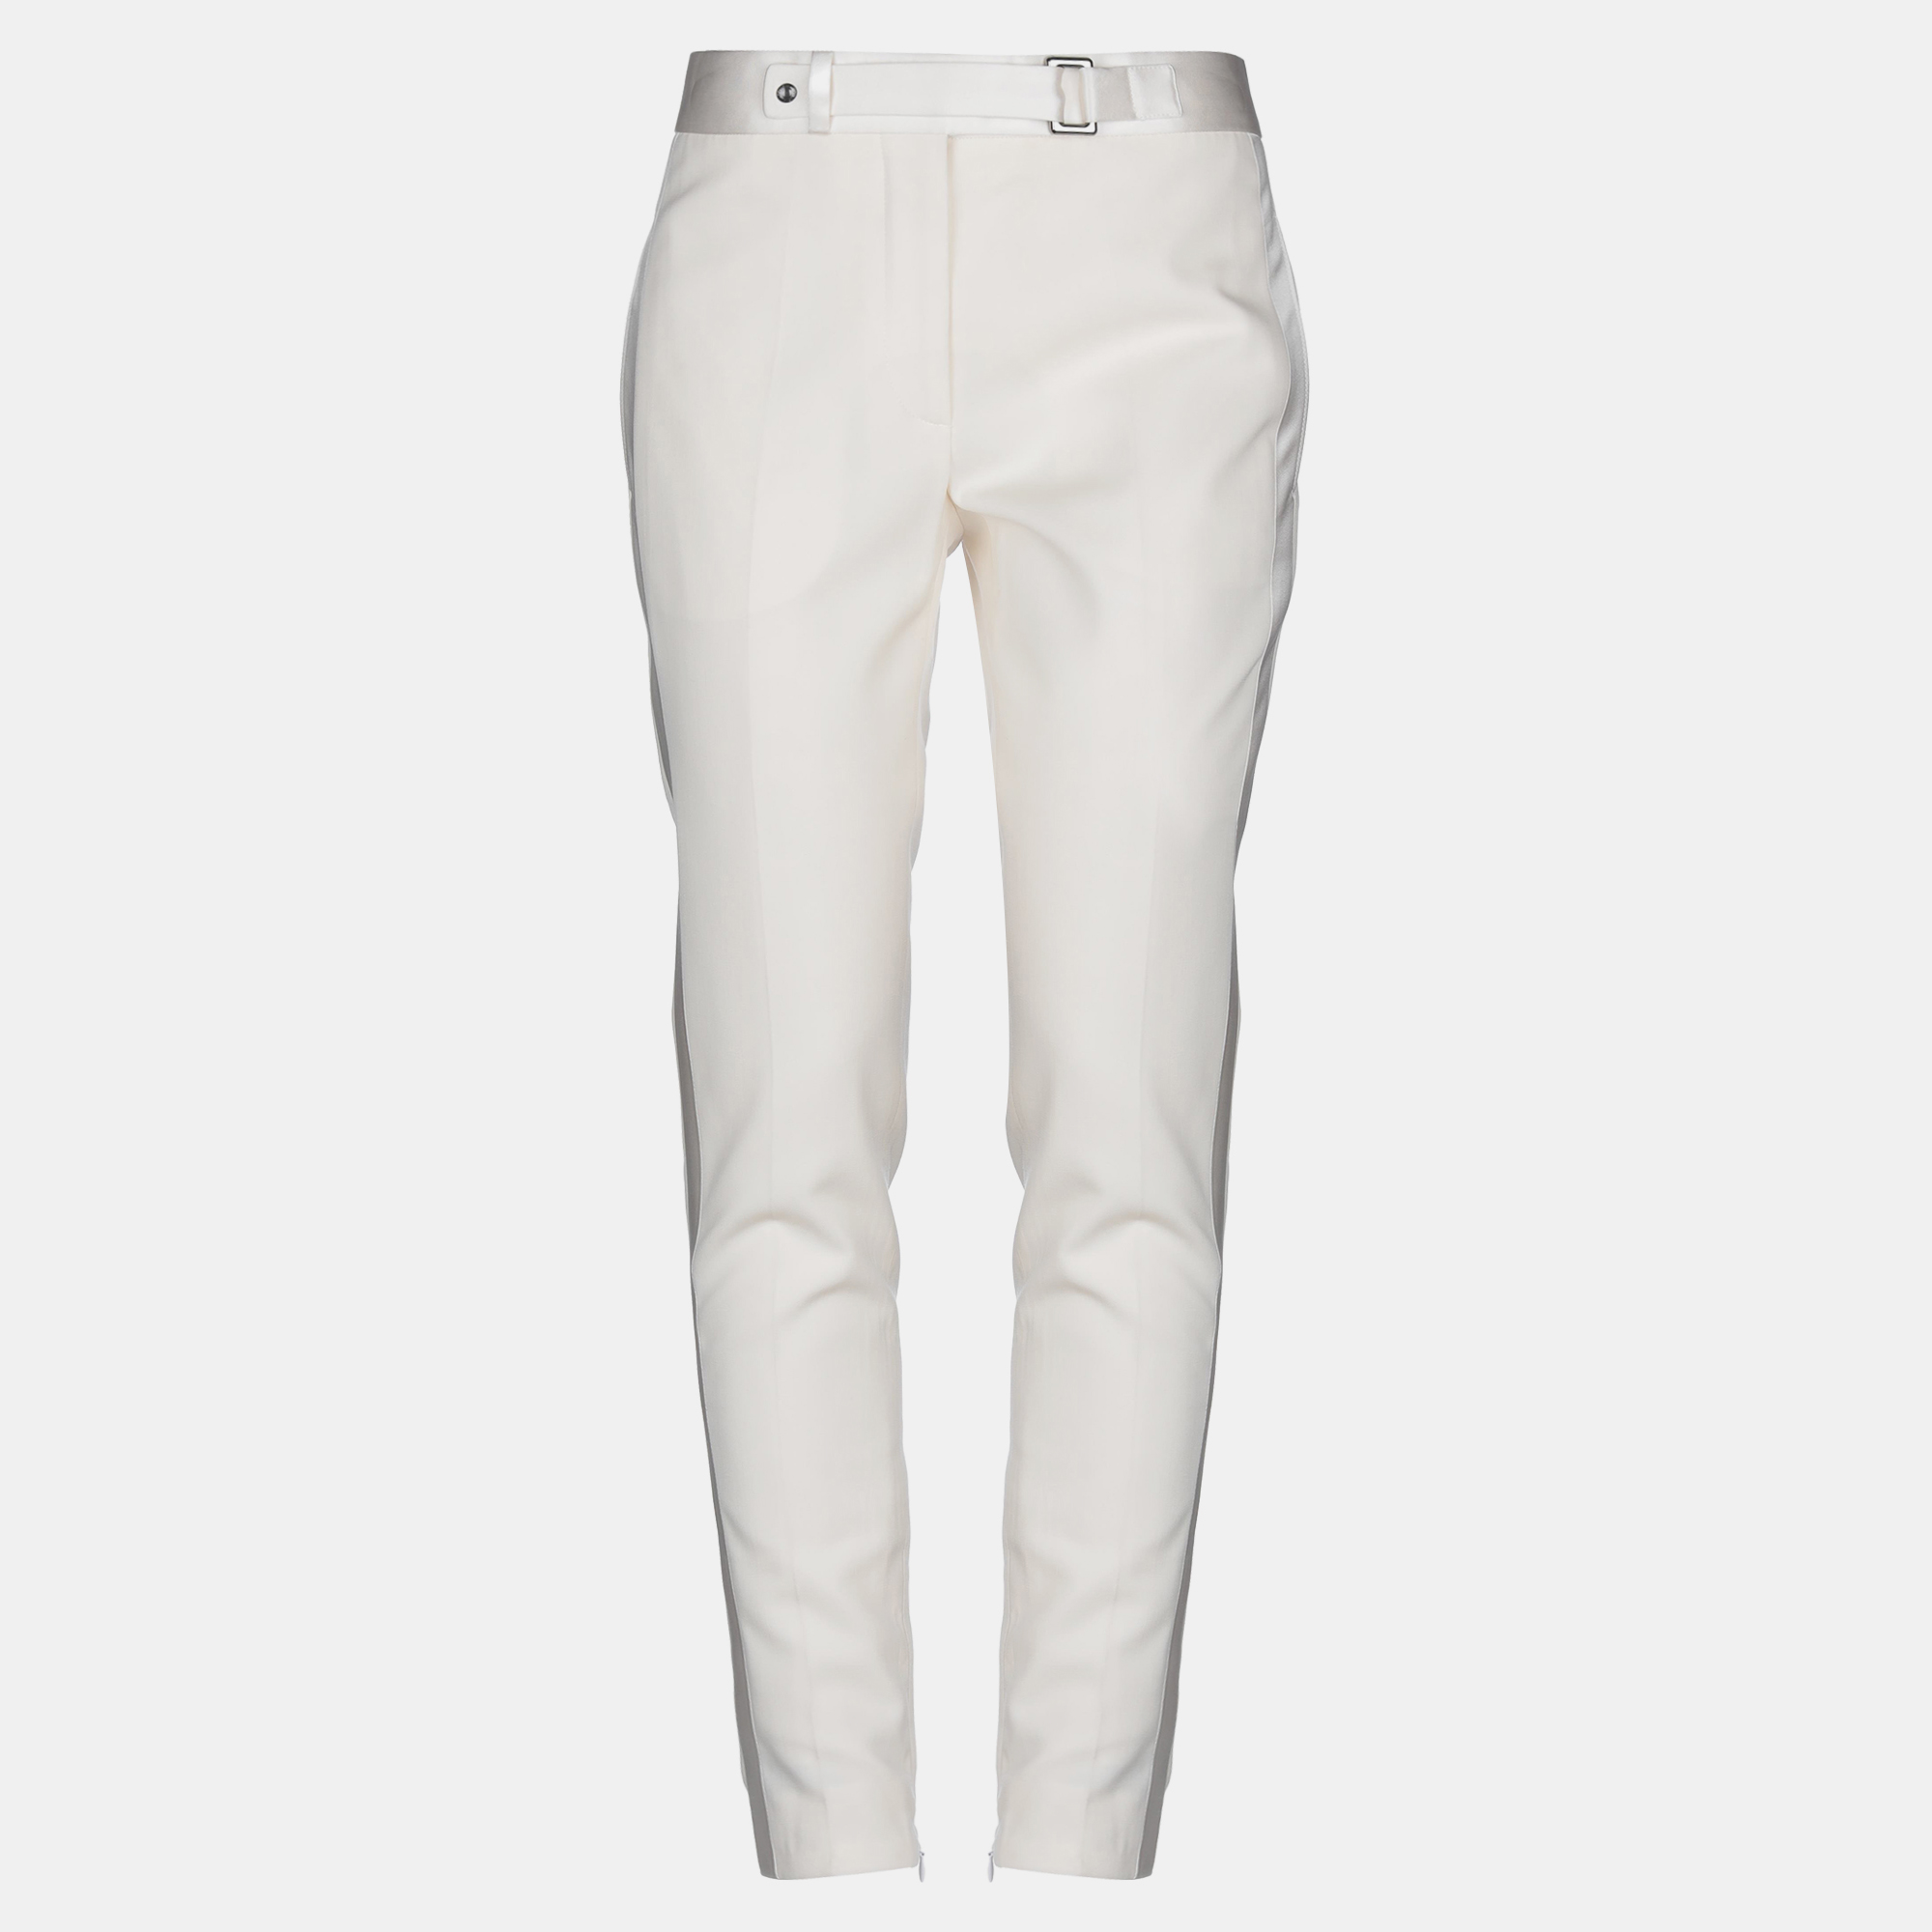 Tom ford cream wool satin striped trousers s (it 38)